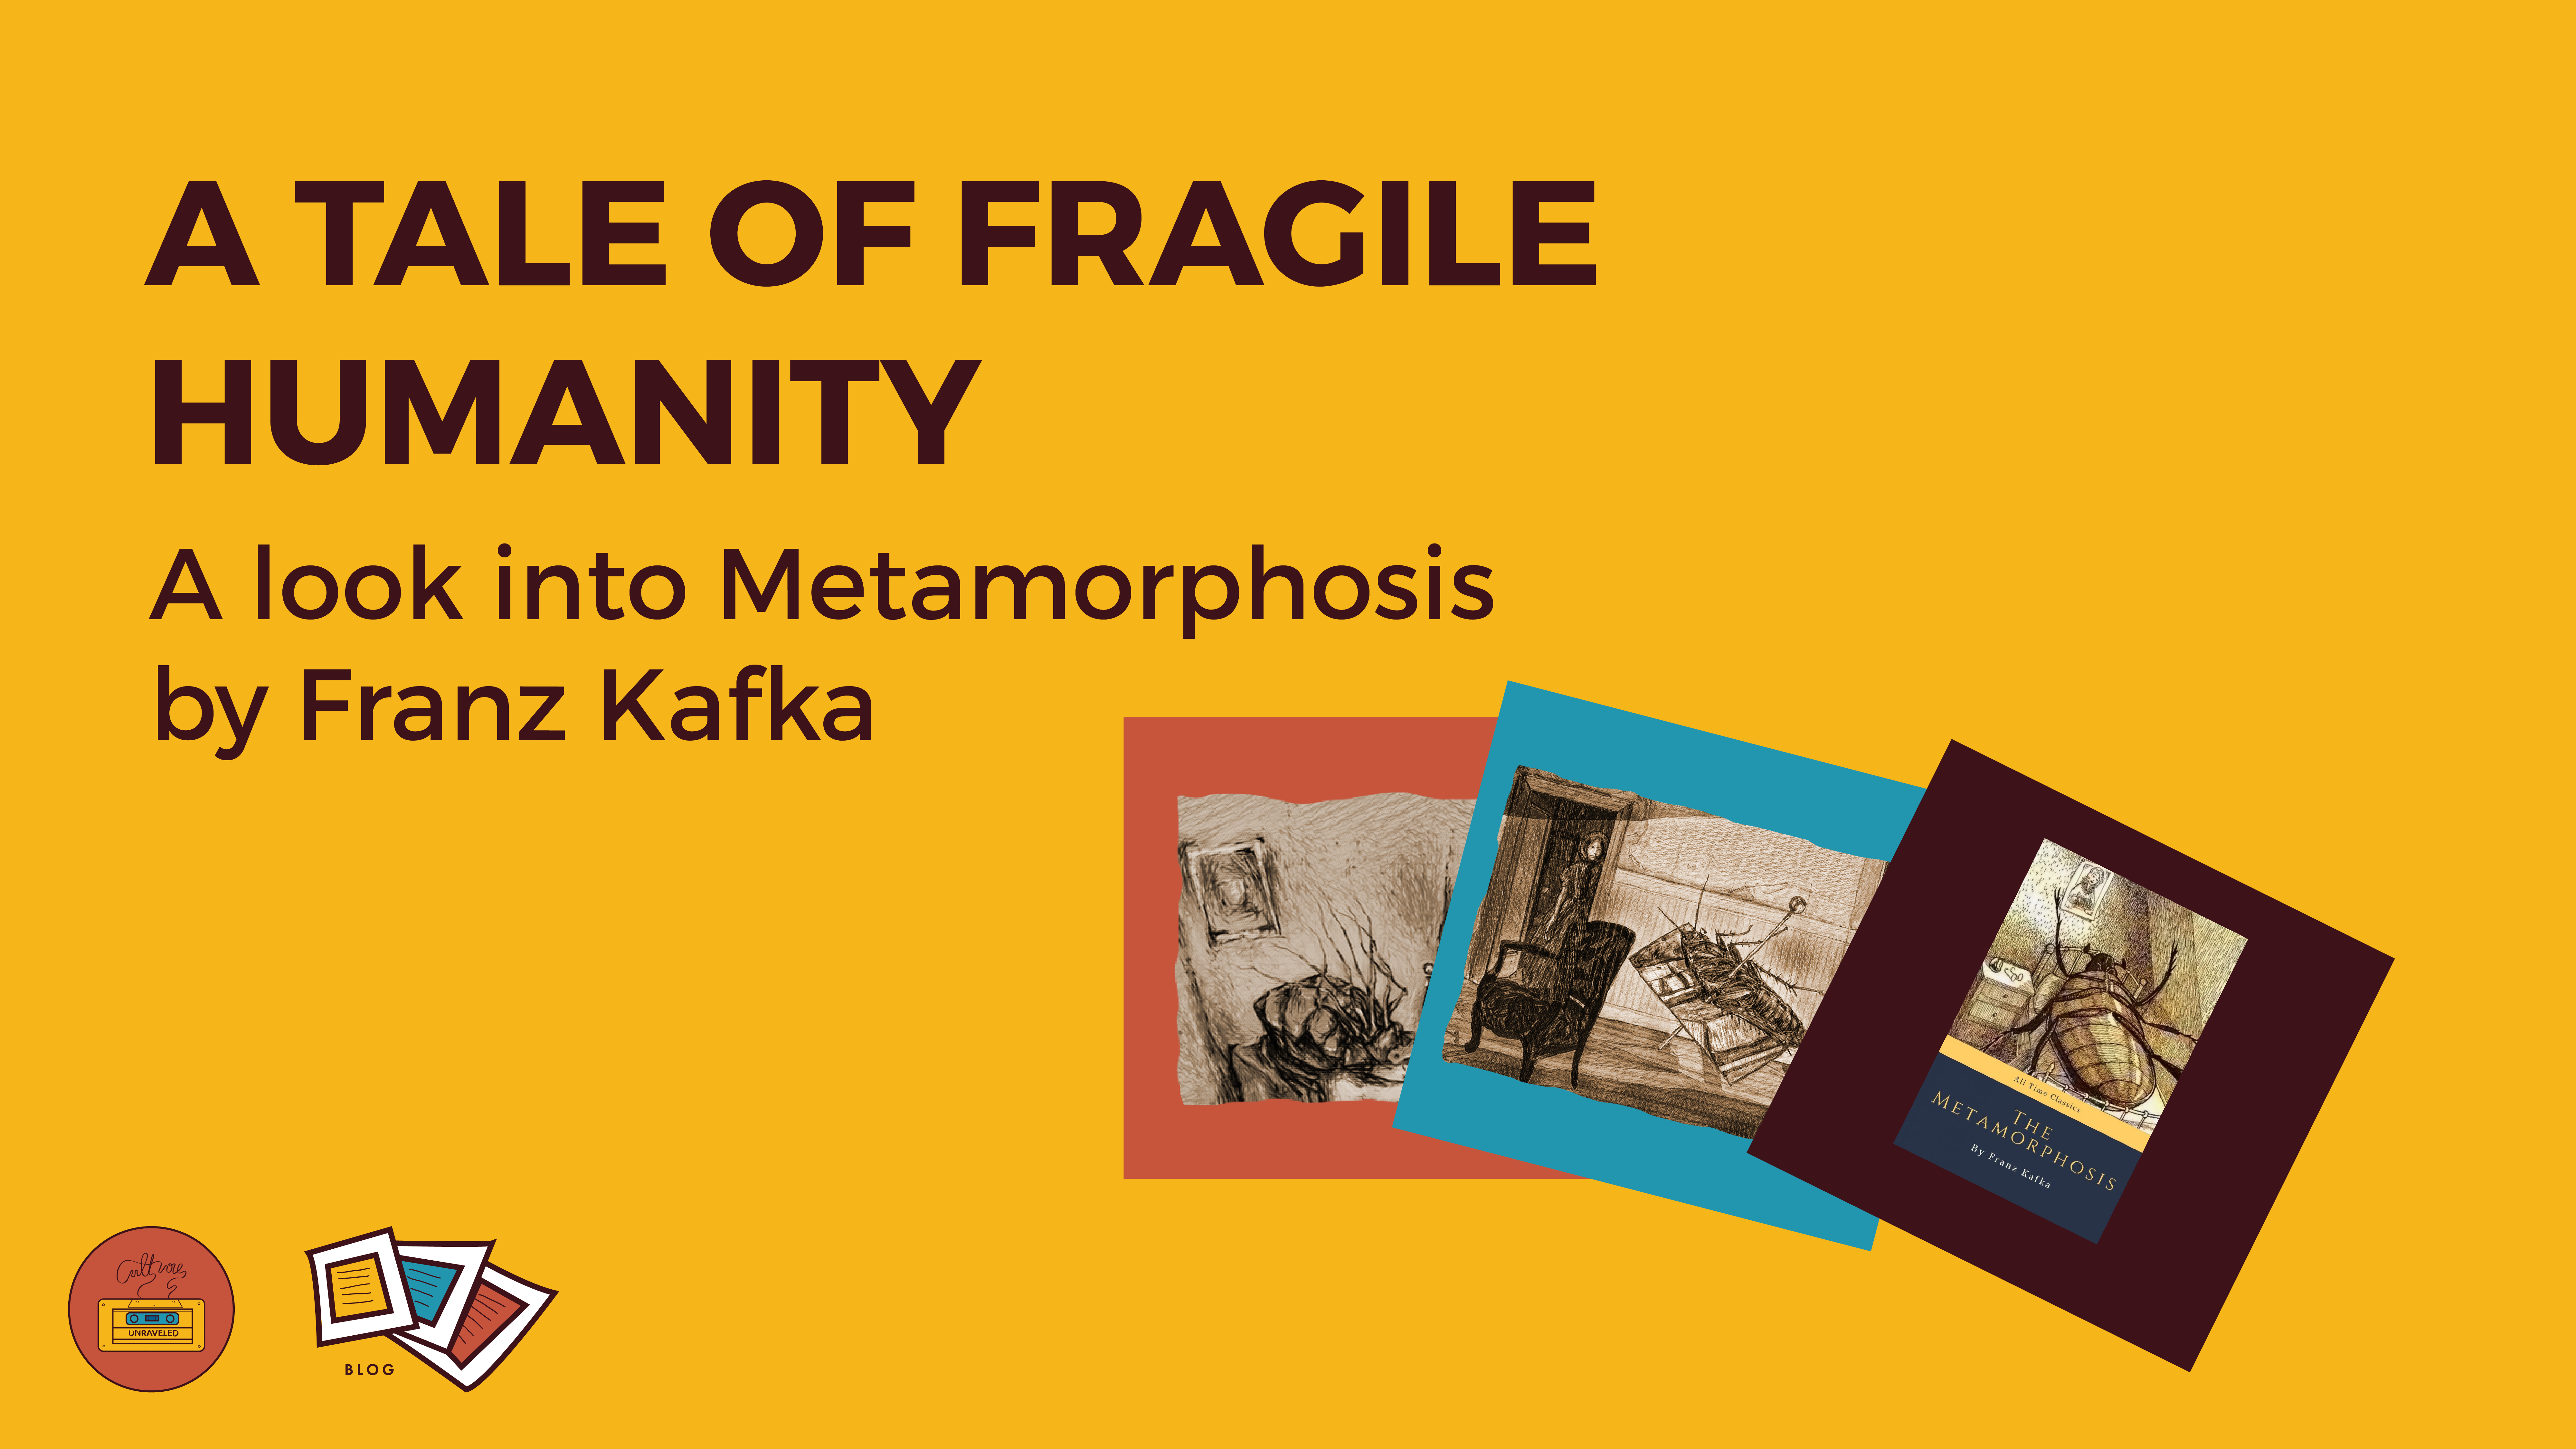 A Tale of Fragile Humanity – A look into Metamorphosis by Franz Kafka